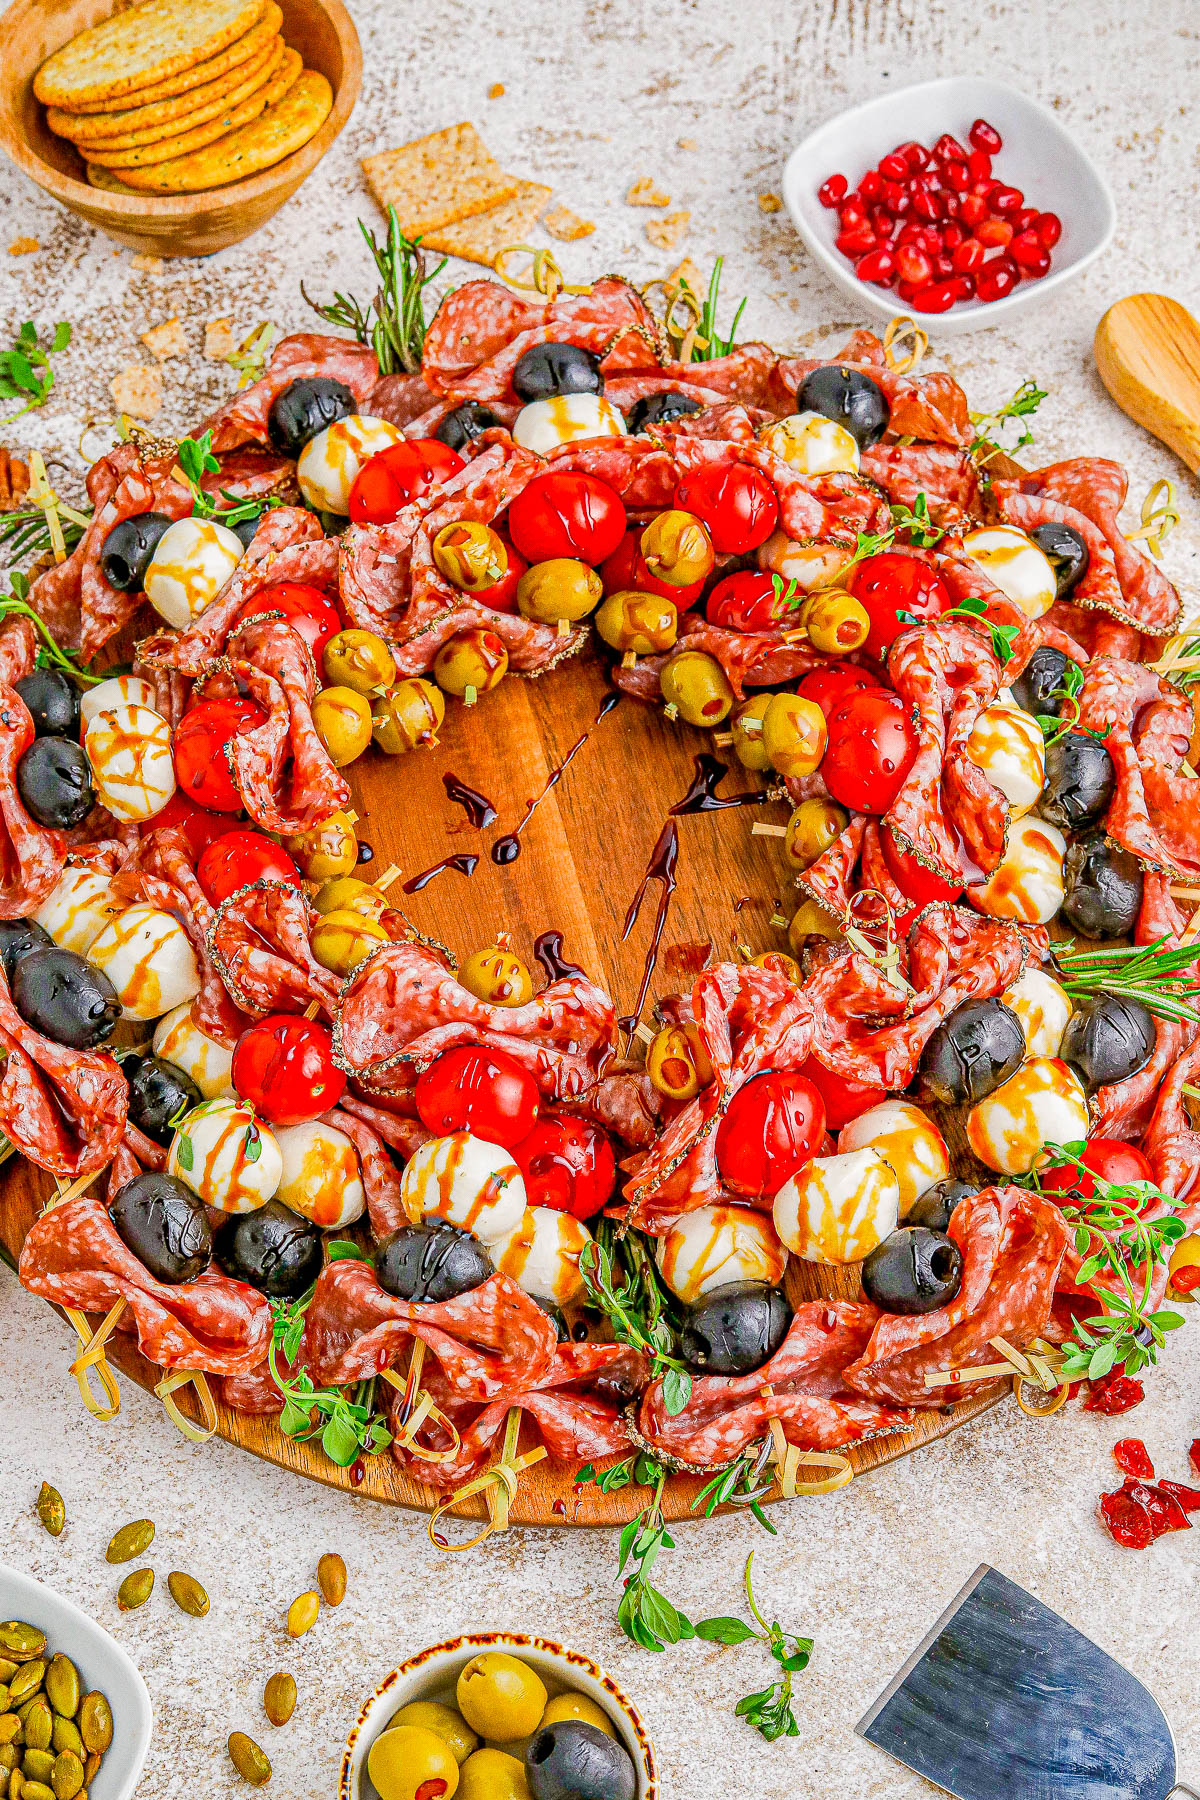 Holiday Antipasto Wreath - A fun and festive Christmas or New Year's Eve appetizer recipe idea that's so FAST and EASY to make! Skewered salami, mozzarella, tomatoes, olives, fresh herbs, and more come together to form the wreath. Mix-and-match the ingredients based on your favorites. You can prep it ahead of your party or event and when your guests see this, I guarantee everyone's eyes will light up! 